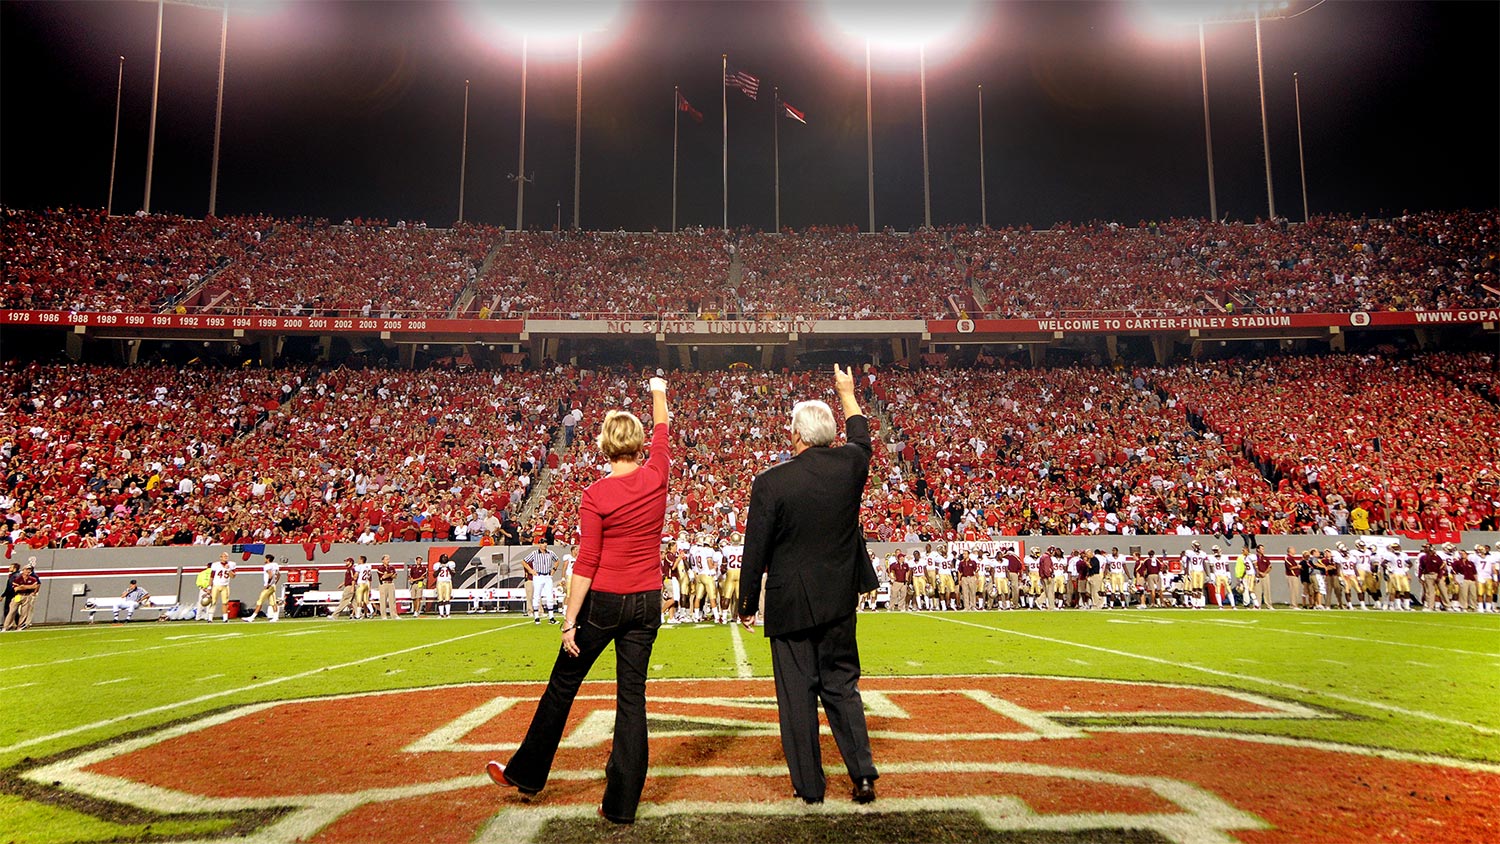 Chancellor Woodson and his wife, Susan, facing the crowd while being introduced during a football game